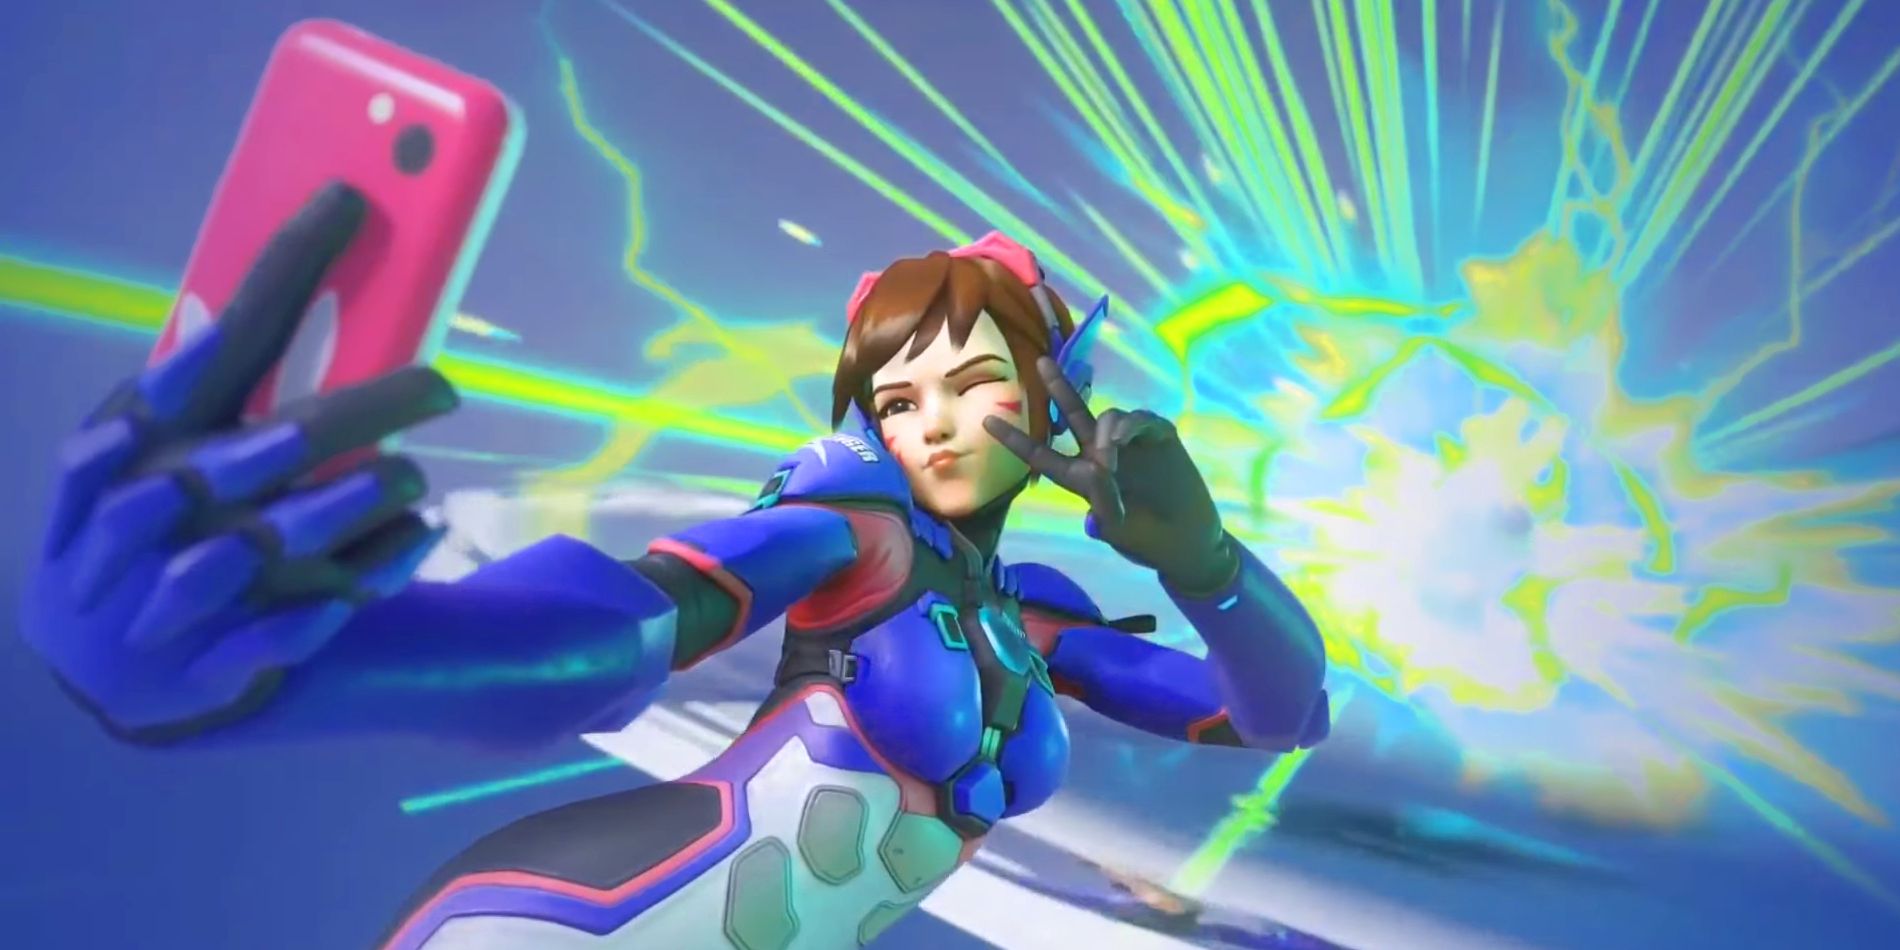 HIghlight intro of Overwatch 2 tank character Dva taking a selfie with her phone while wearing her new skin. 